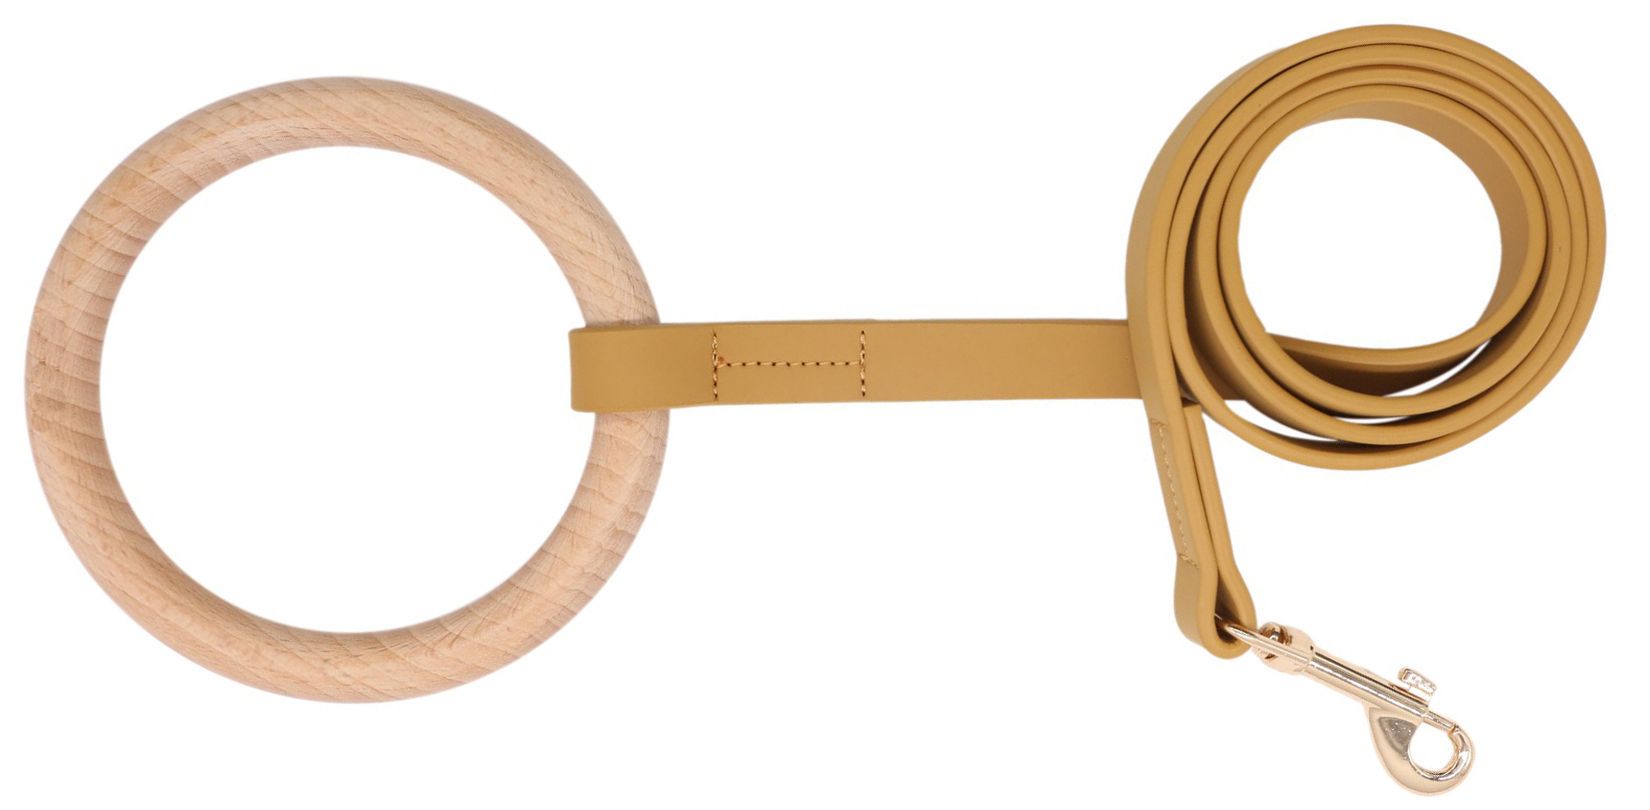 Pet Life ® 'Ever-Craft' Boutique Series Beechwood and Leather Designer Dog Leash Apricot 